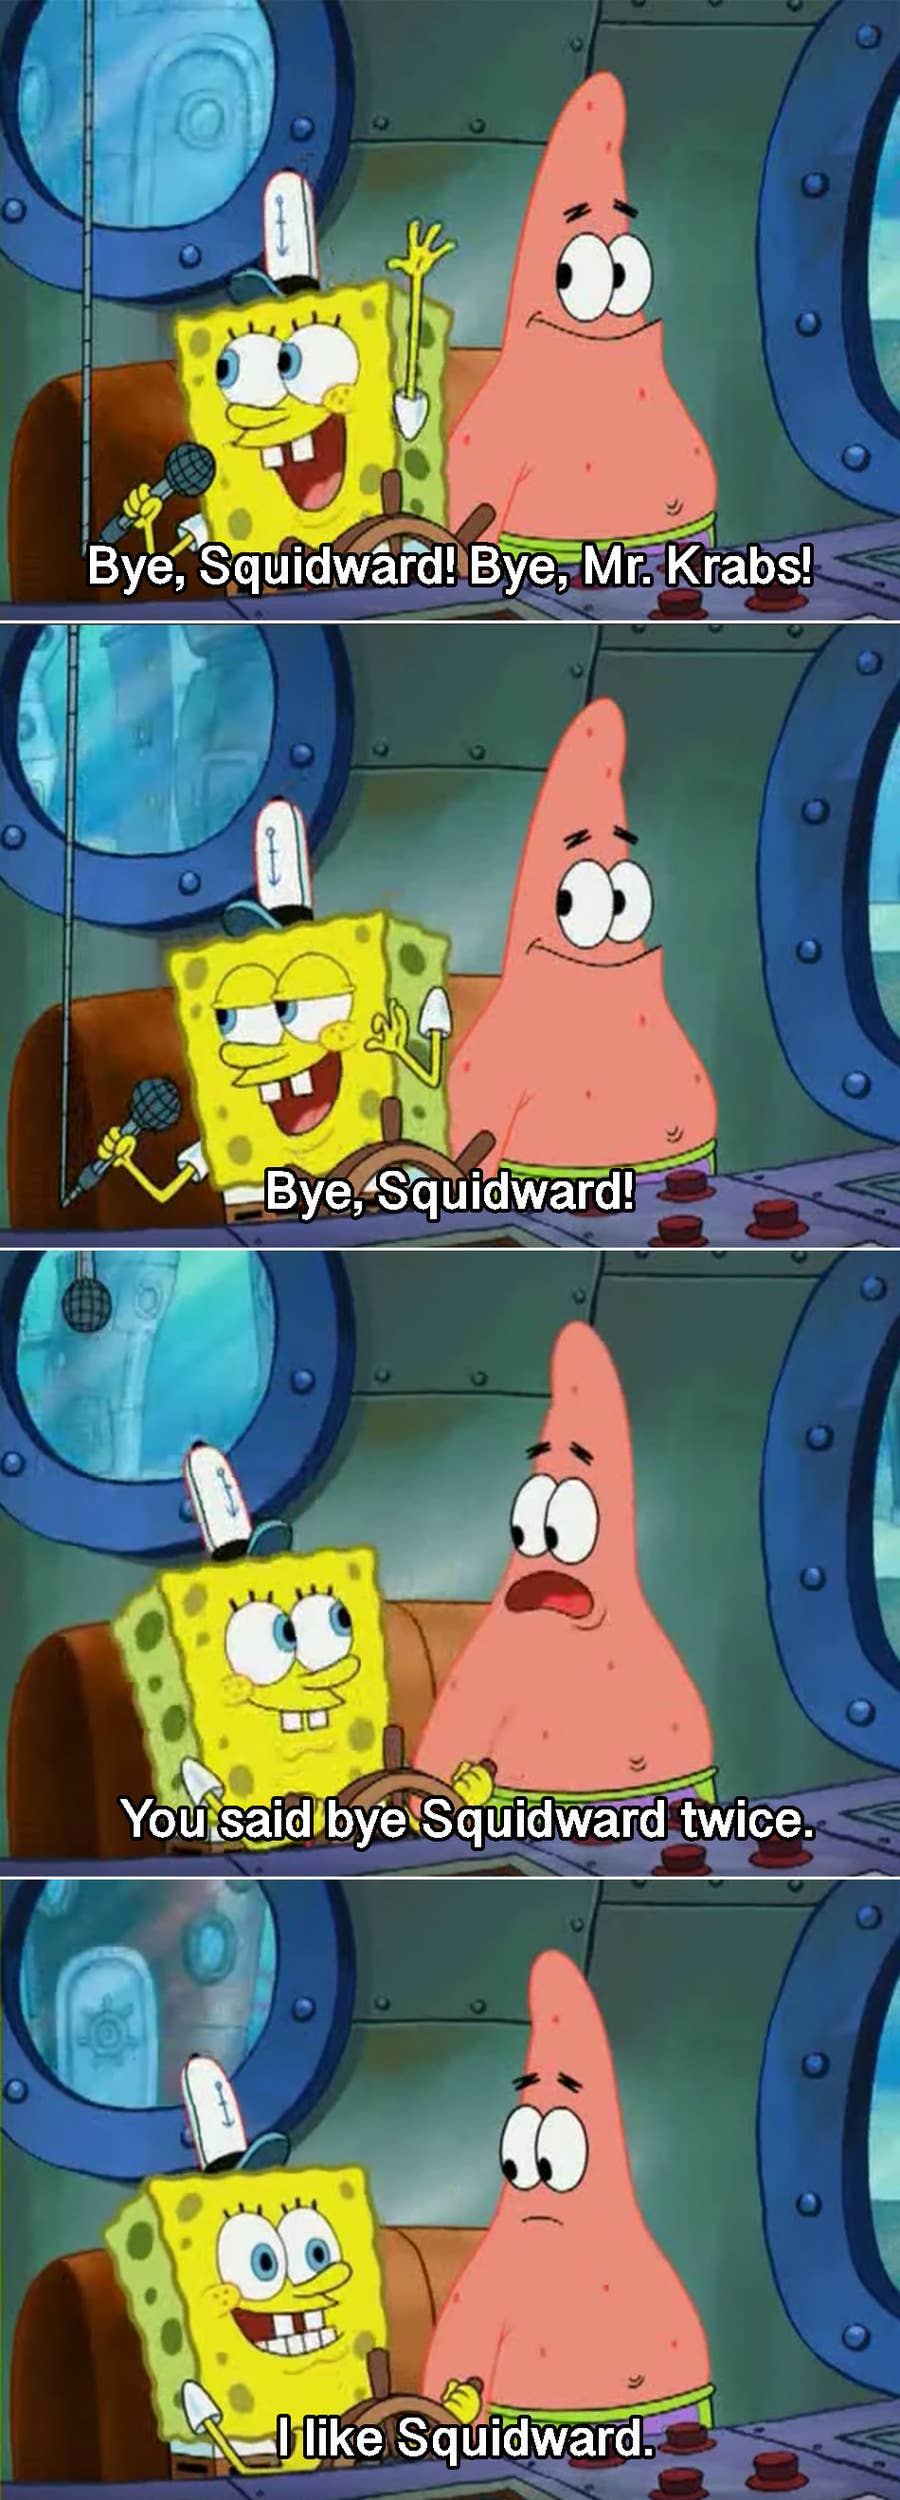 18 Adult Spongebob Jokes That Completely Went Over Your Head As A Kid